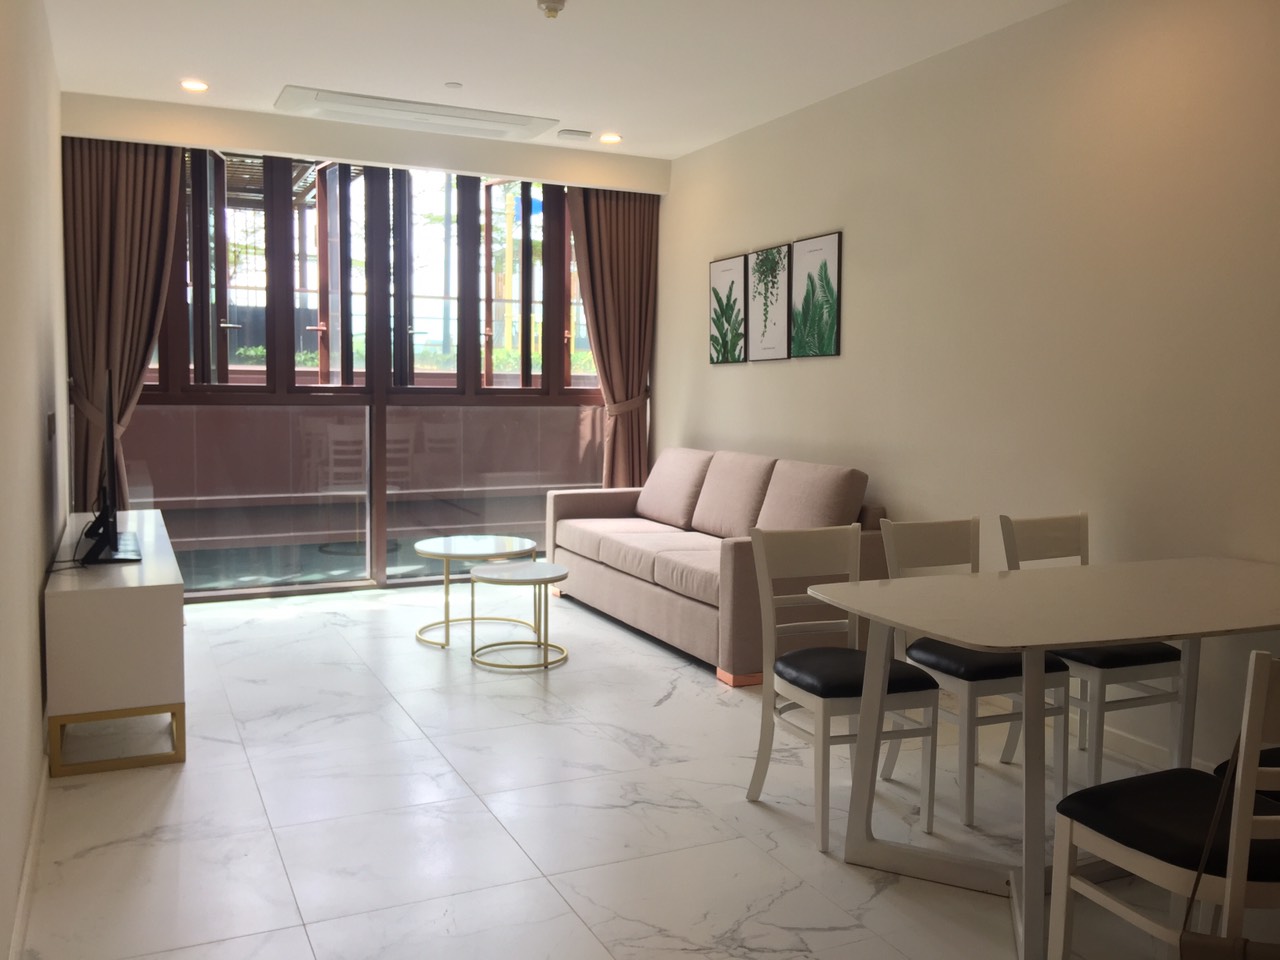 Fully furnished 3 bedroom apartment for rent with garden in The Metropole